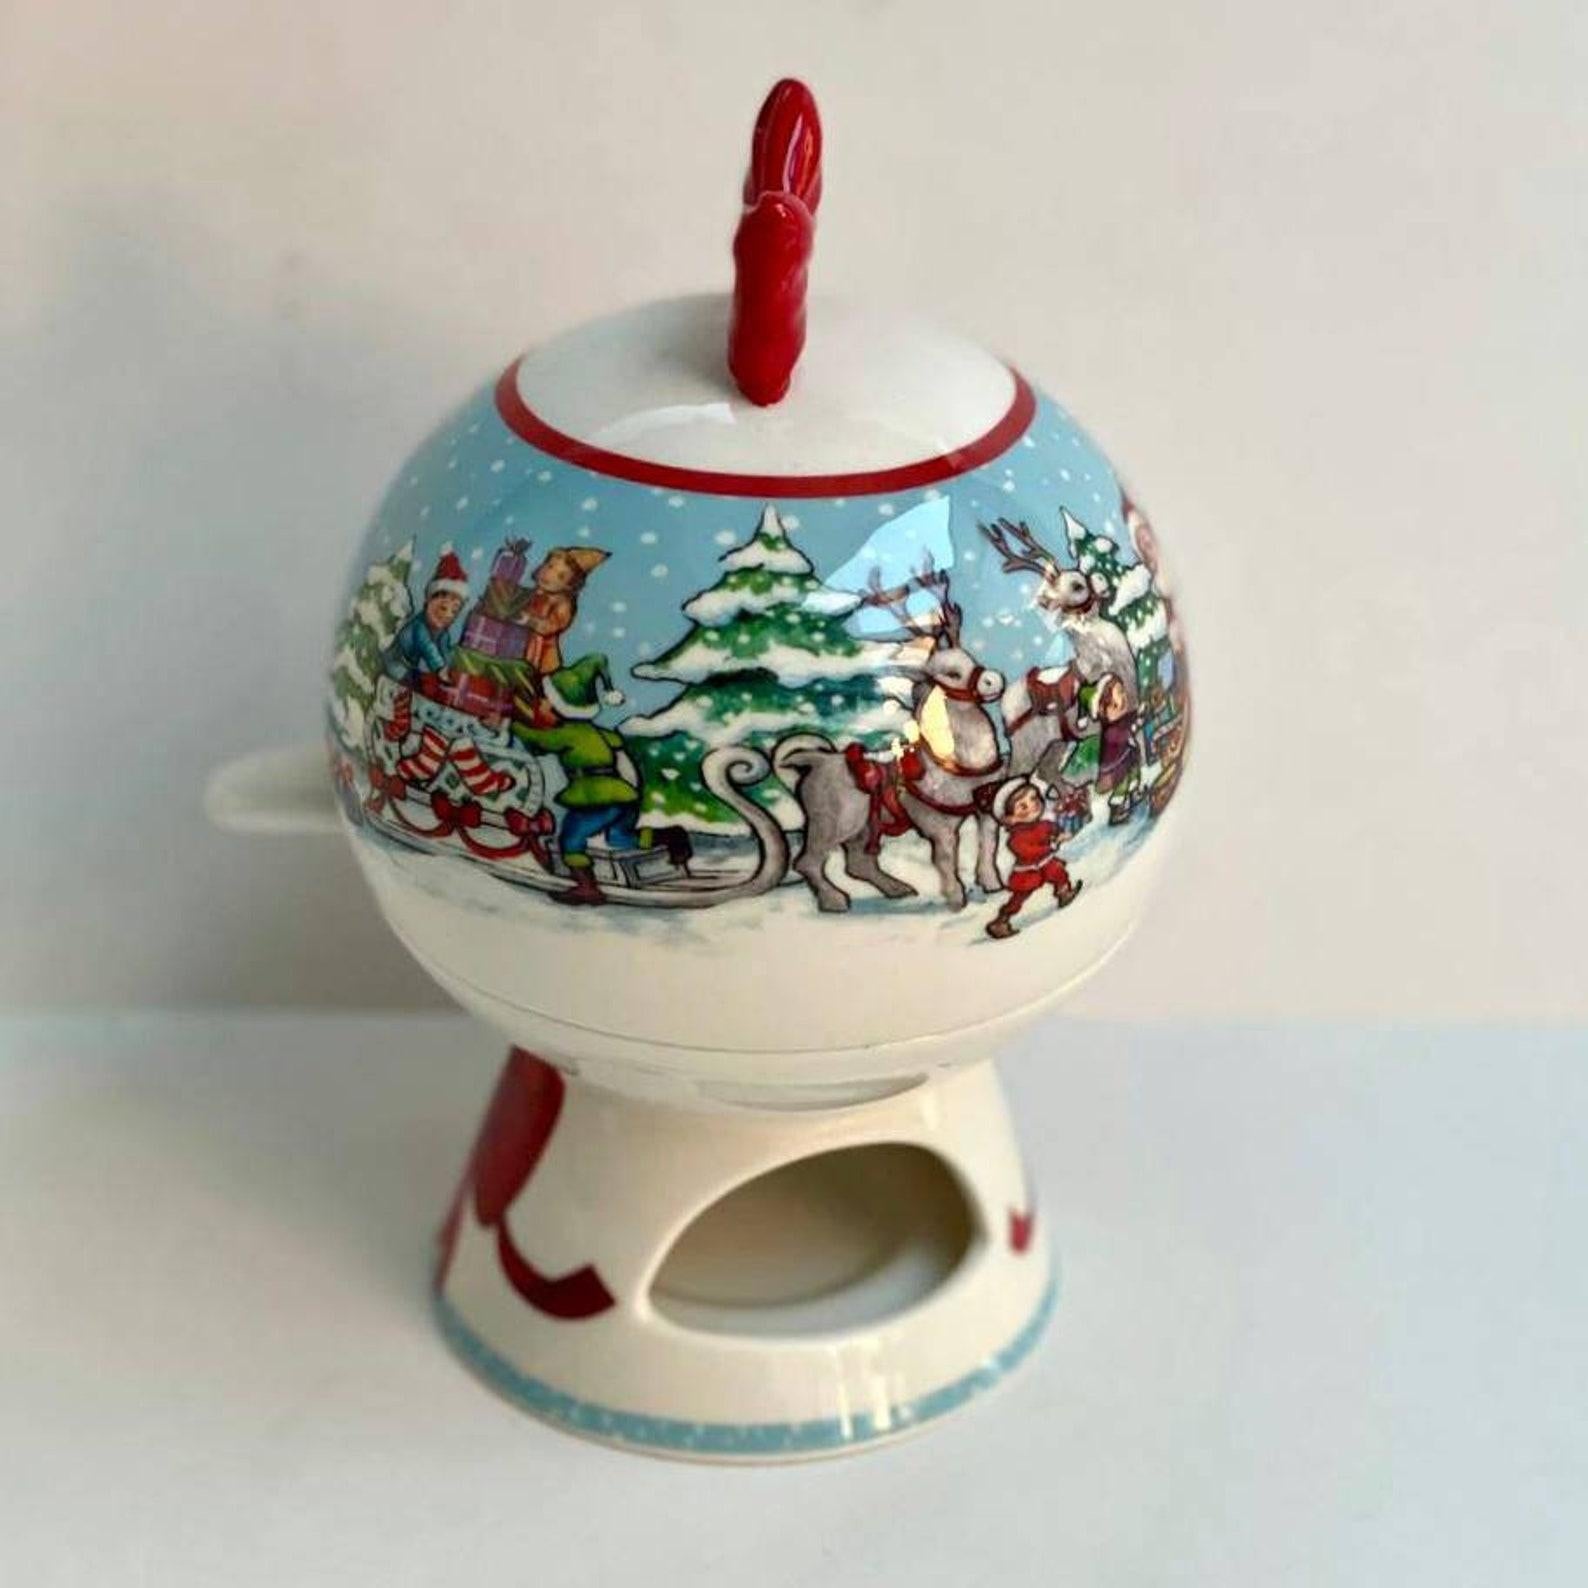 Villeroy & Boch Winter Bakery Delight Apple Baker. 
Premium Porcelain. 
Rare edition. 

This Apple Baker was designed to cook an apple with the heat from an ordinary tea light. The enticing aroma of baking apples will delight your guests.